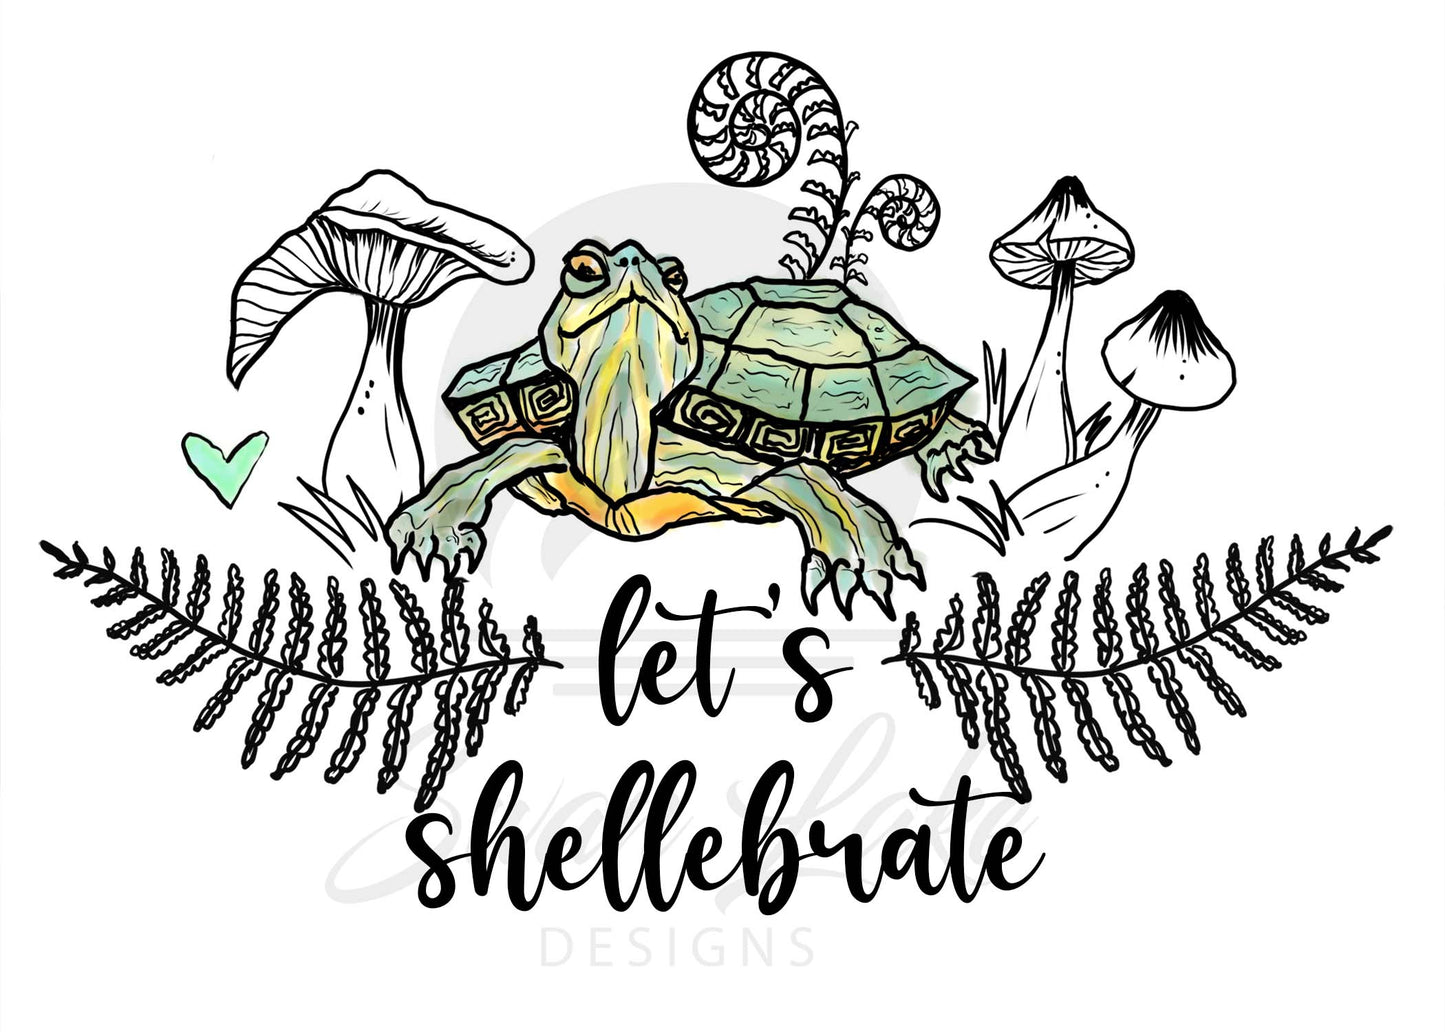 card - turtle "let's shellebrate"  *free shipping